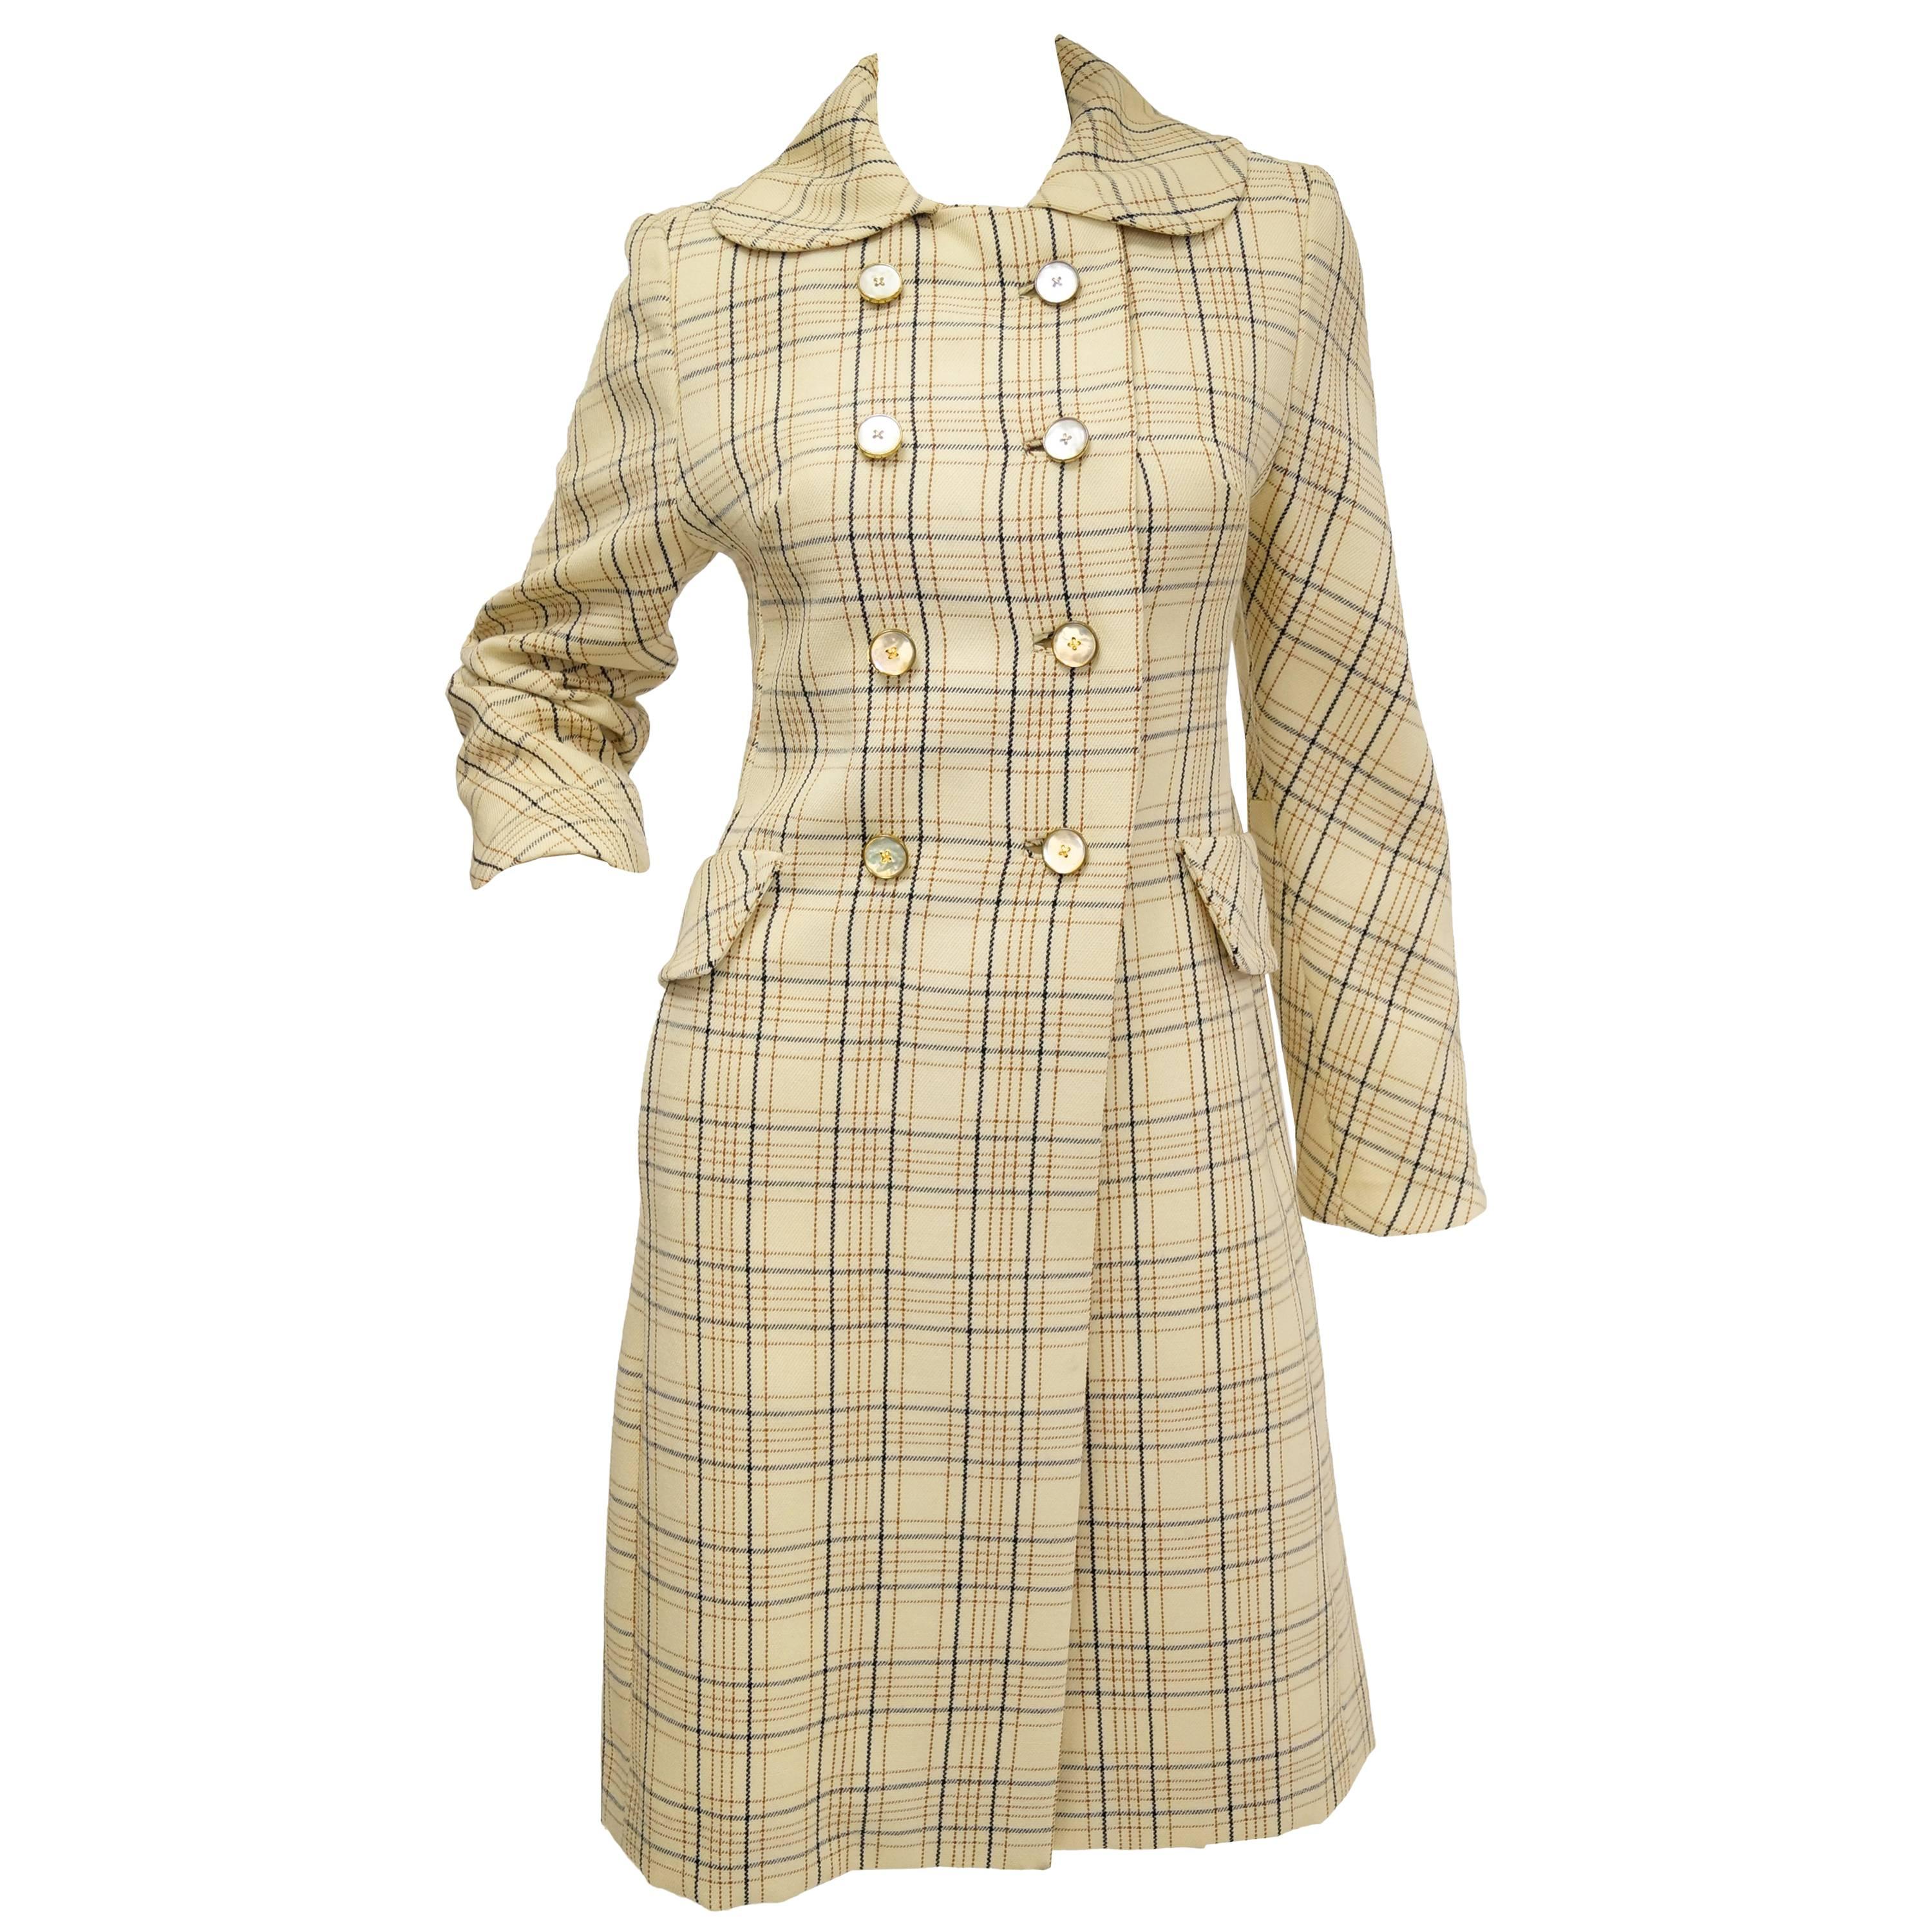  1960s Bill Blass Cream Wool Plaid Coat with Mother of Pearl Buttons